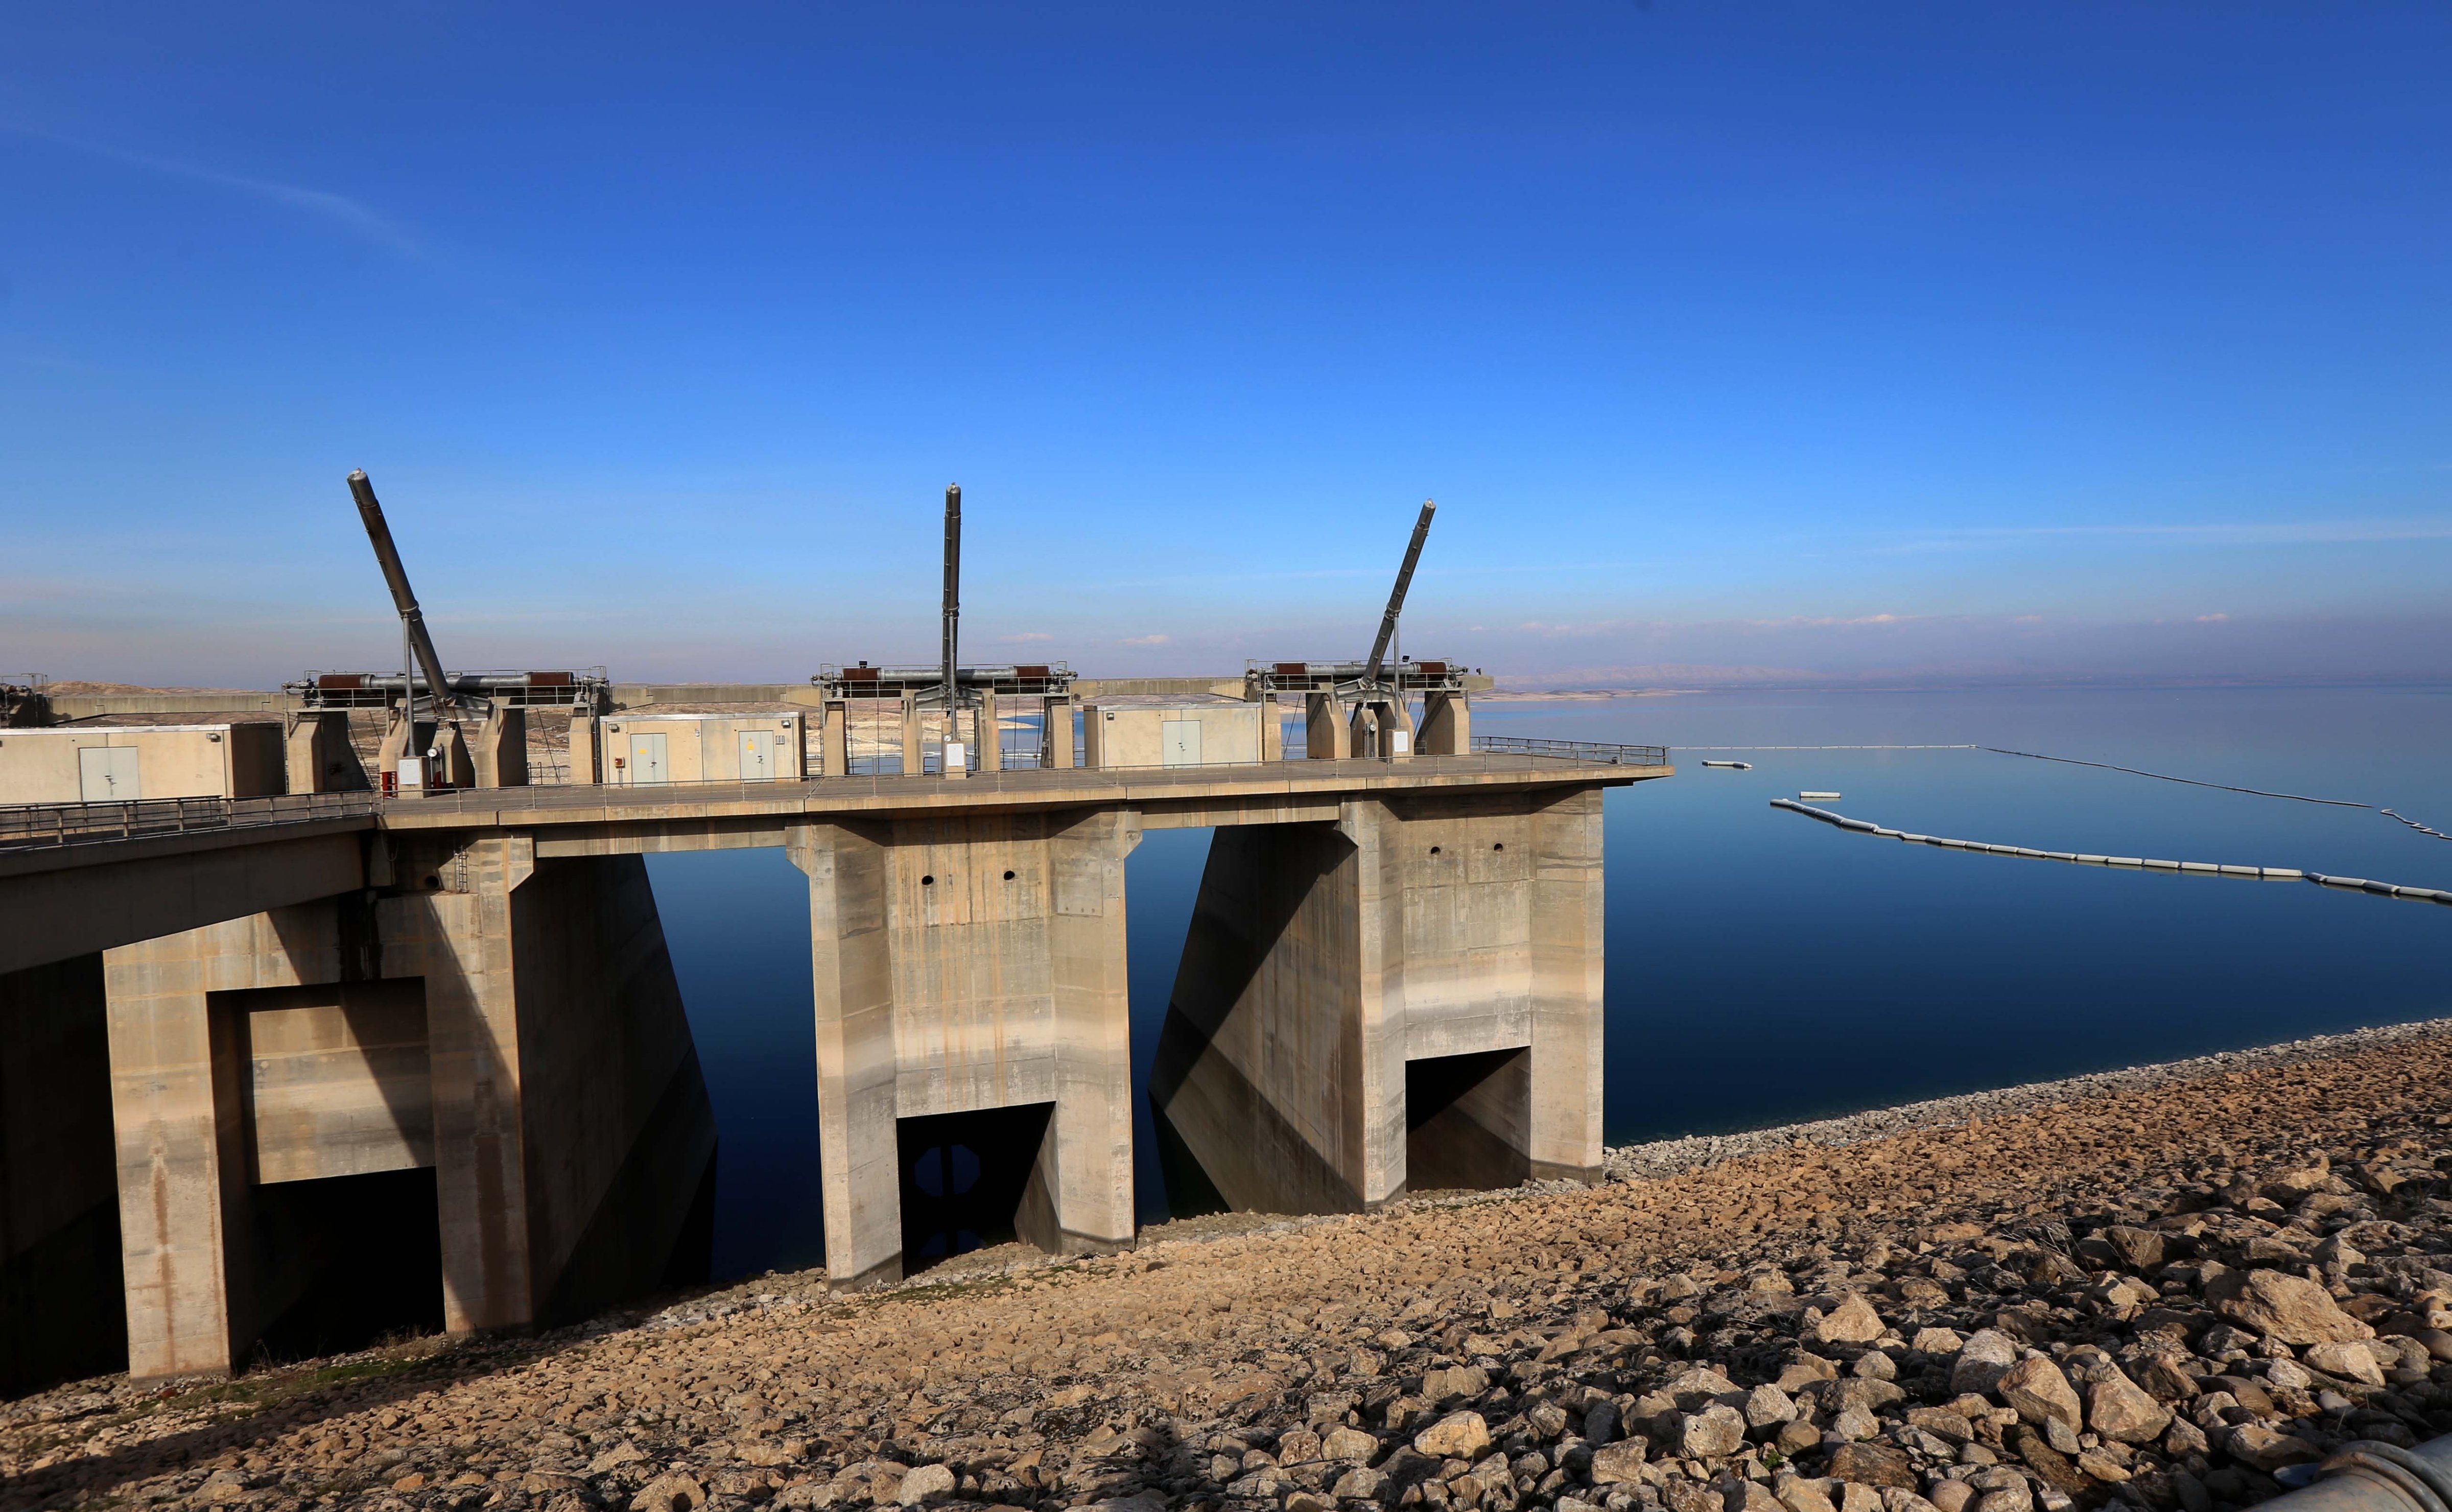 Mosul Dam on the Tigris River, around 50 km north of the Iraqi city of Mosul, Feb. 1, 2016 (Safin Hamed—AFP/Getty Images)